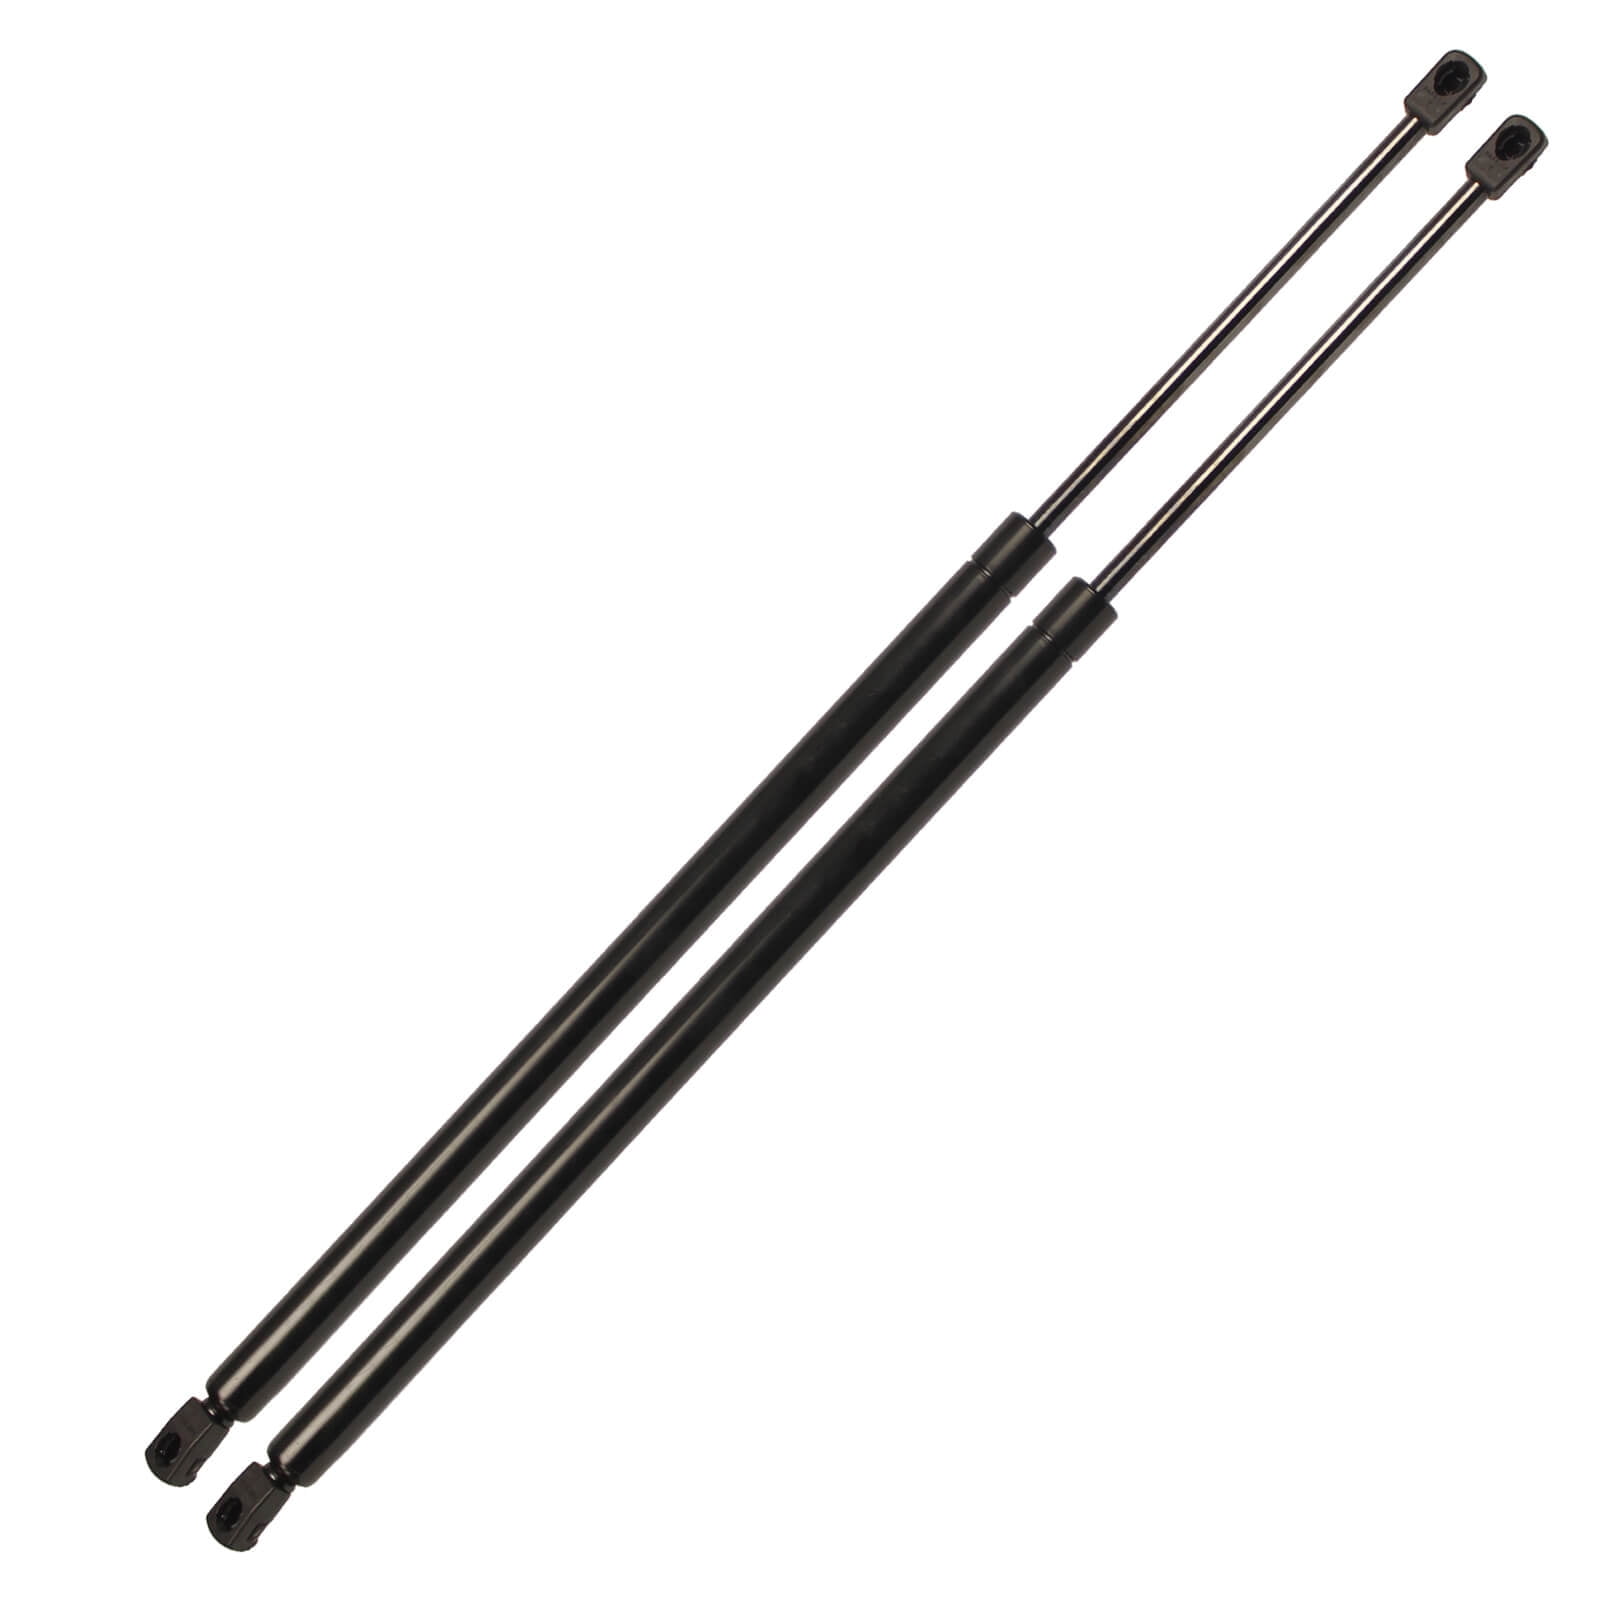 tb 2 pc Strong Arm Liftgate Lift Supports for Dodge Grand Caravan 2008-2015 